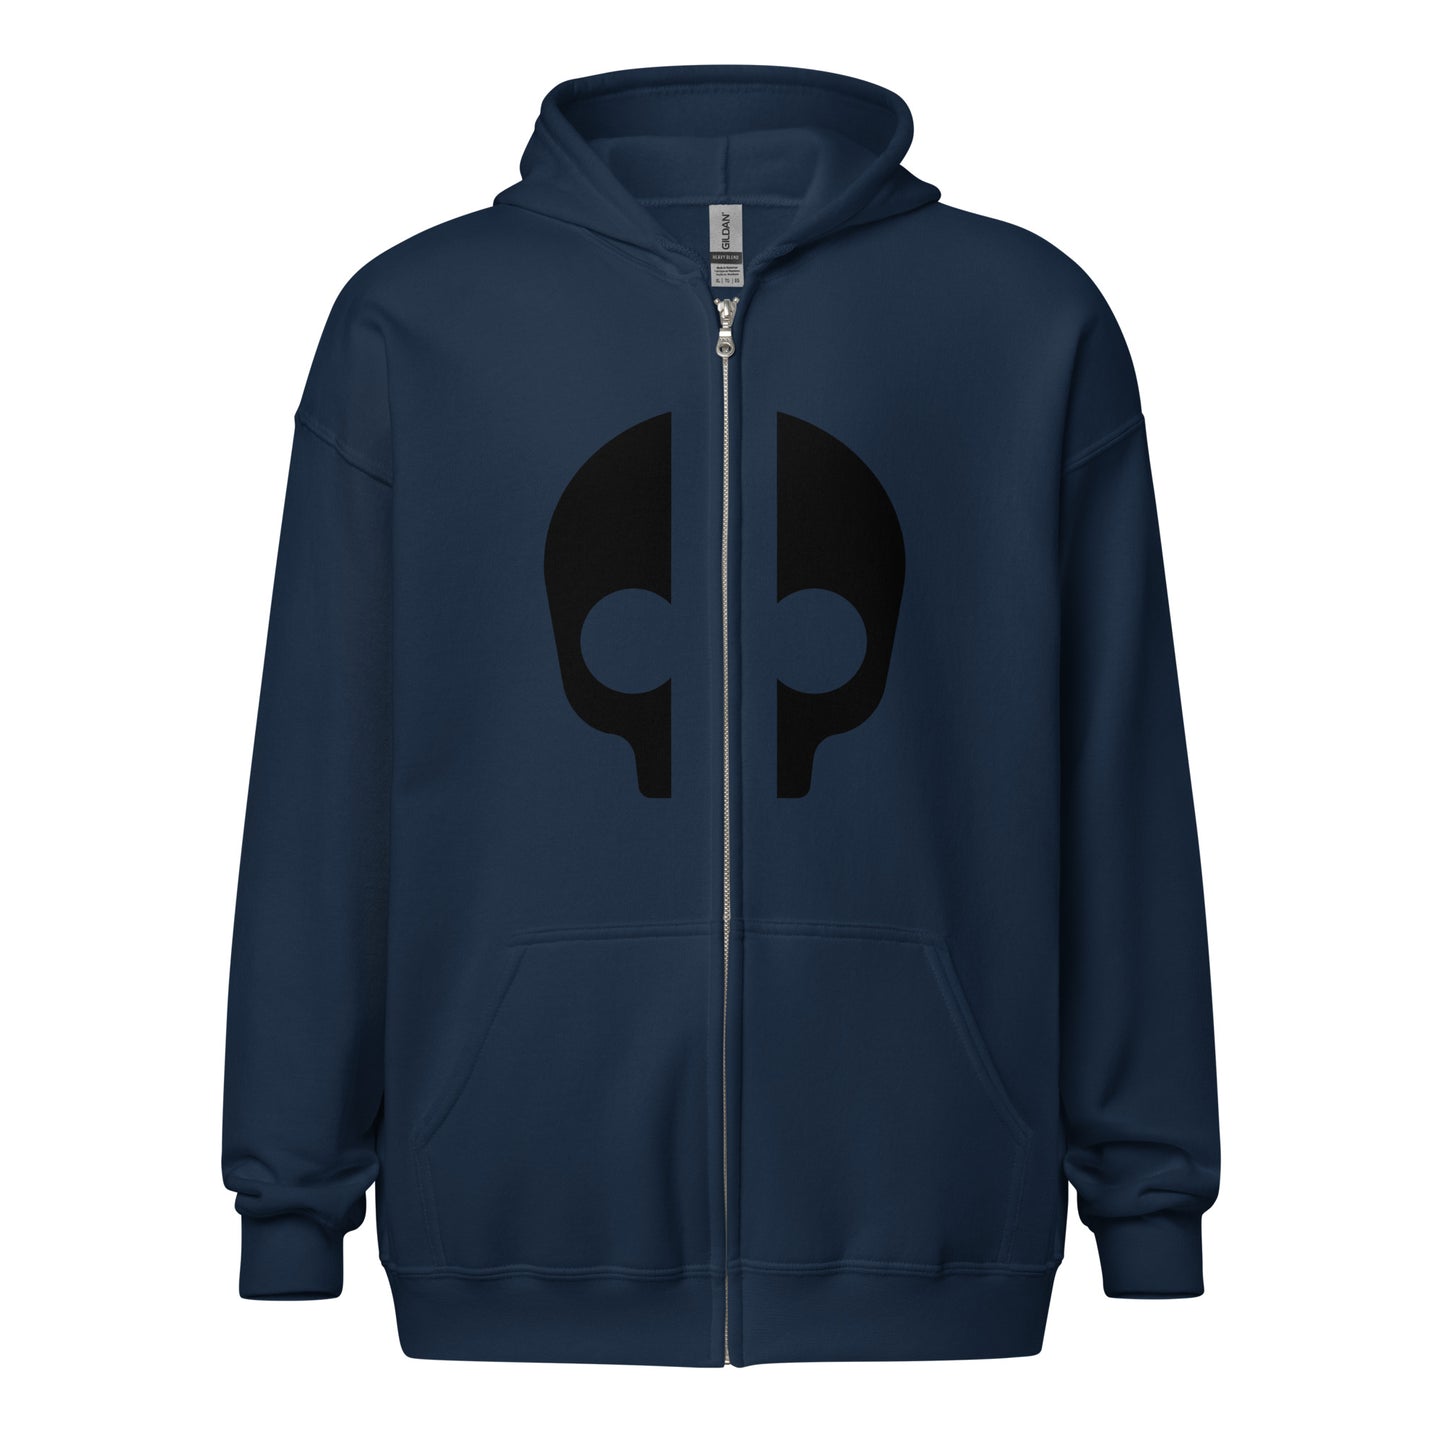 Stylish fleece hoodie featuring a metal zipper, front pockets, and drawstring hood in a rich, comfortable design